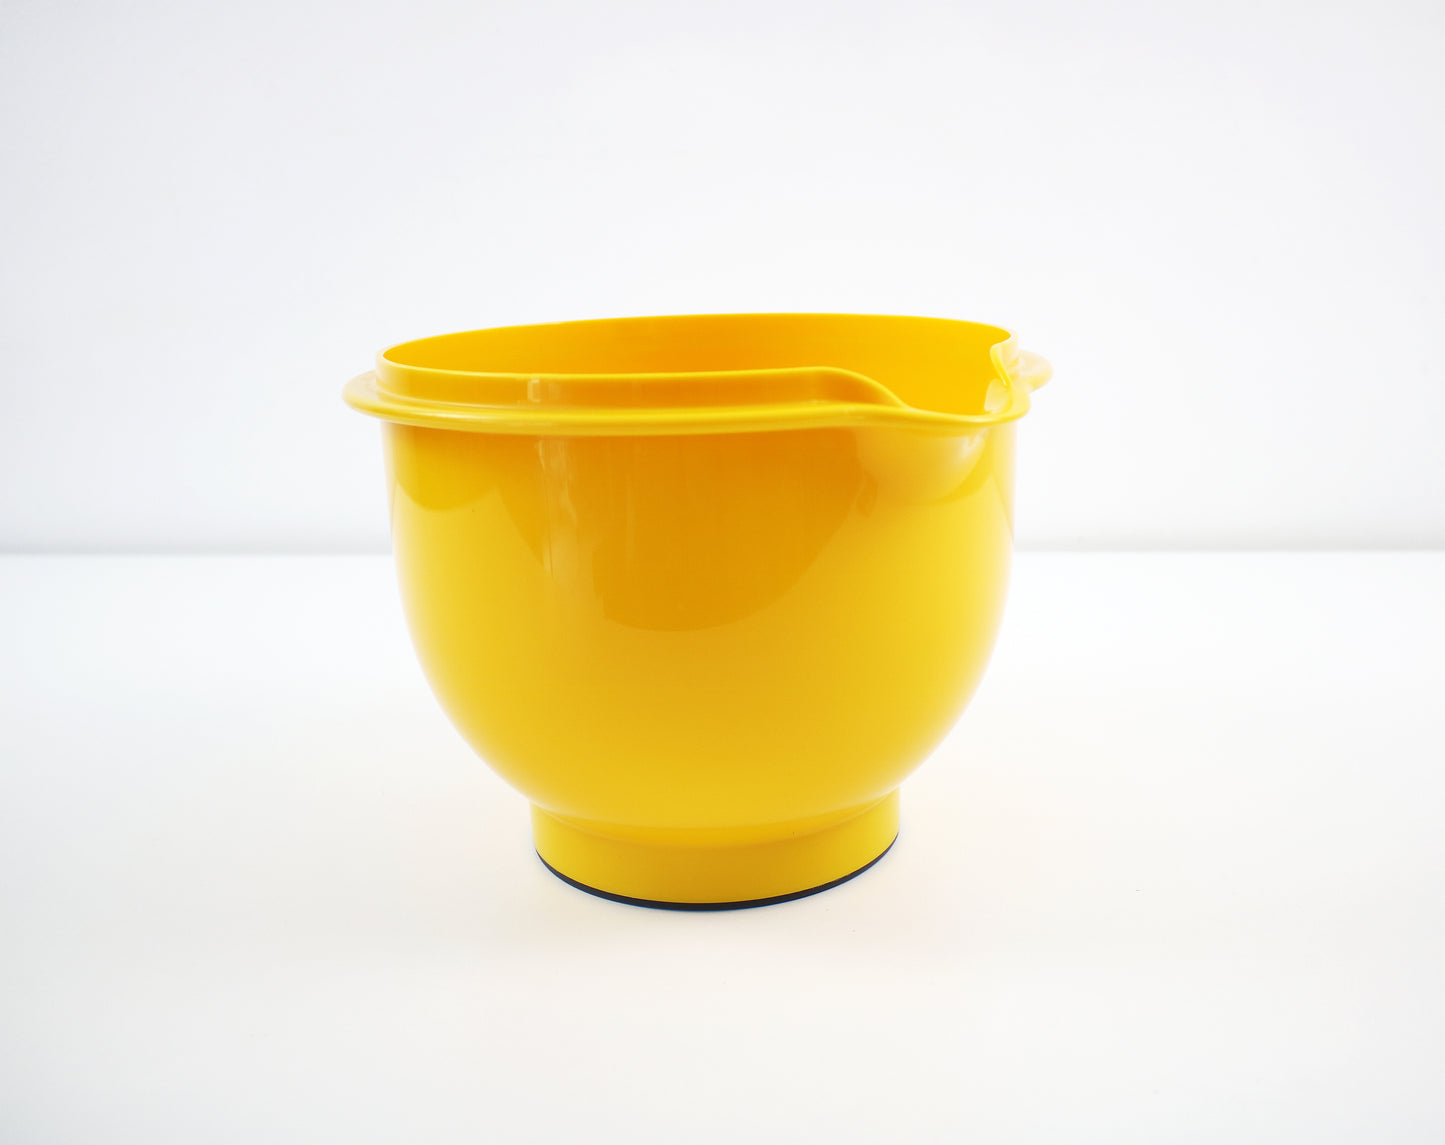 Chef Line yellow mixing bowl by Bruno Gecchelin for Guzzini Italy - retired colour